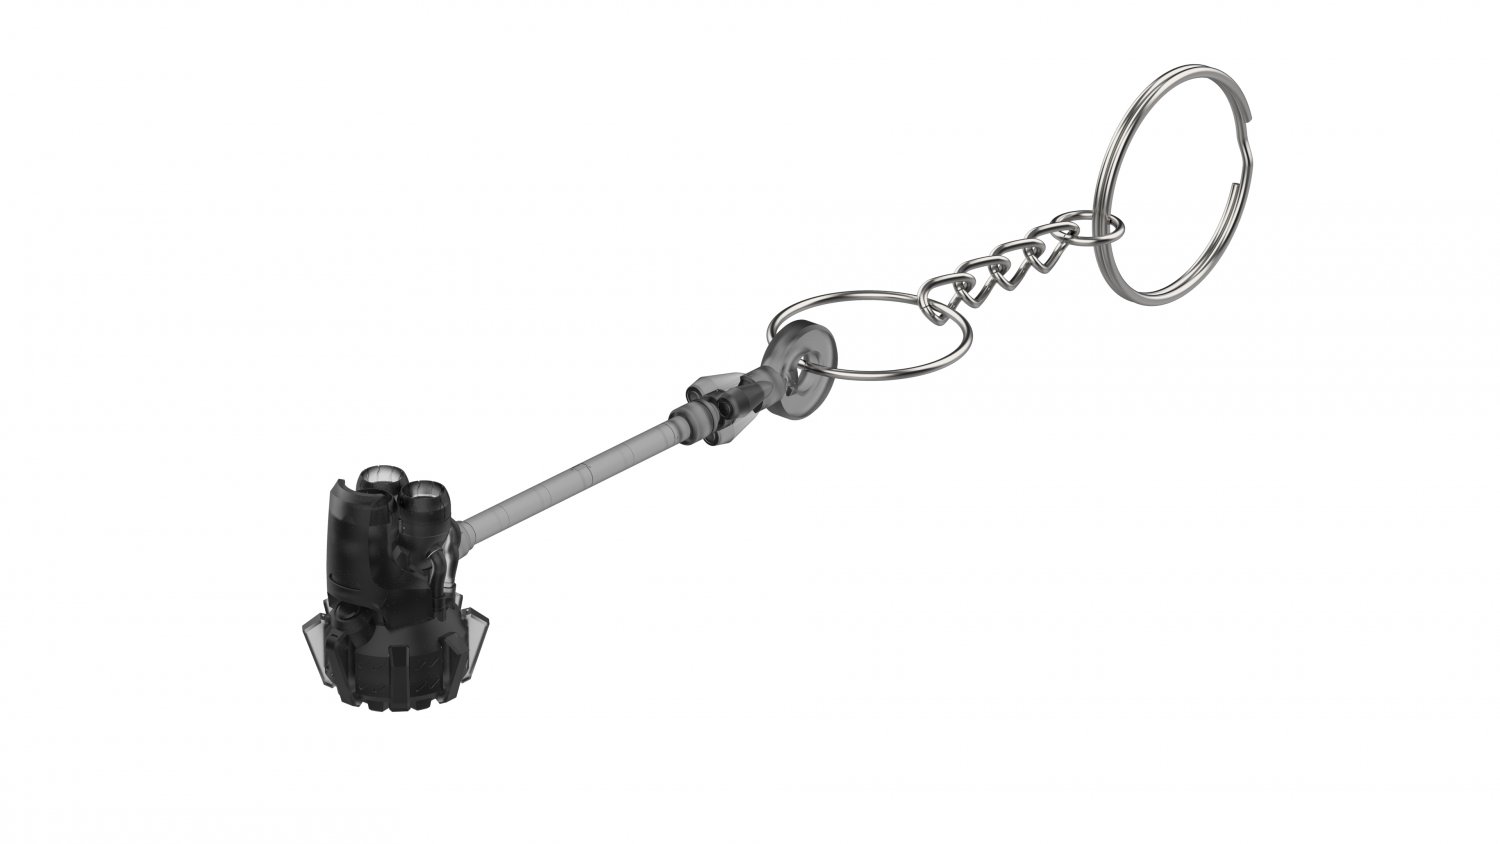 Titanium Key ring Knuckle with Quick-Release key chain / Aged Texture.